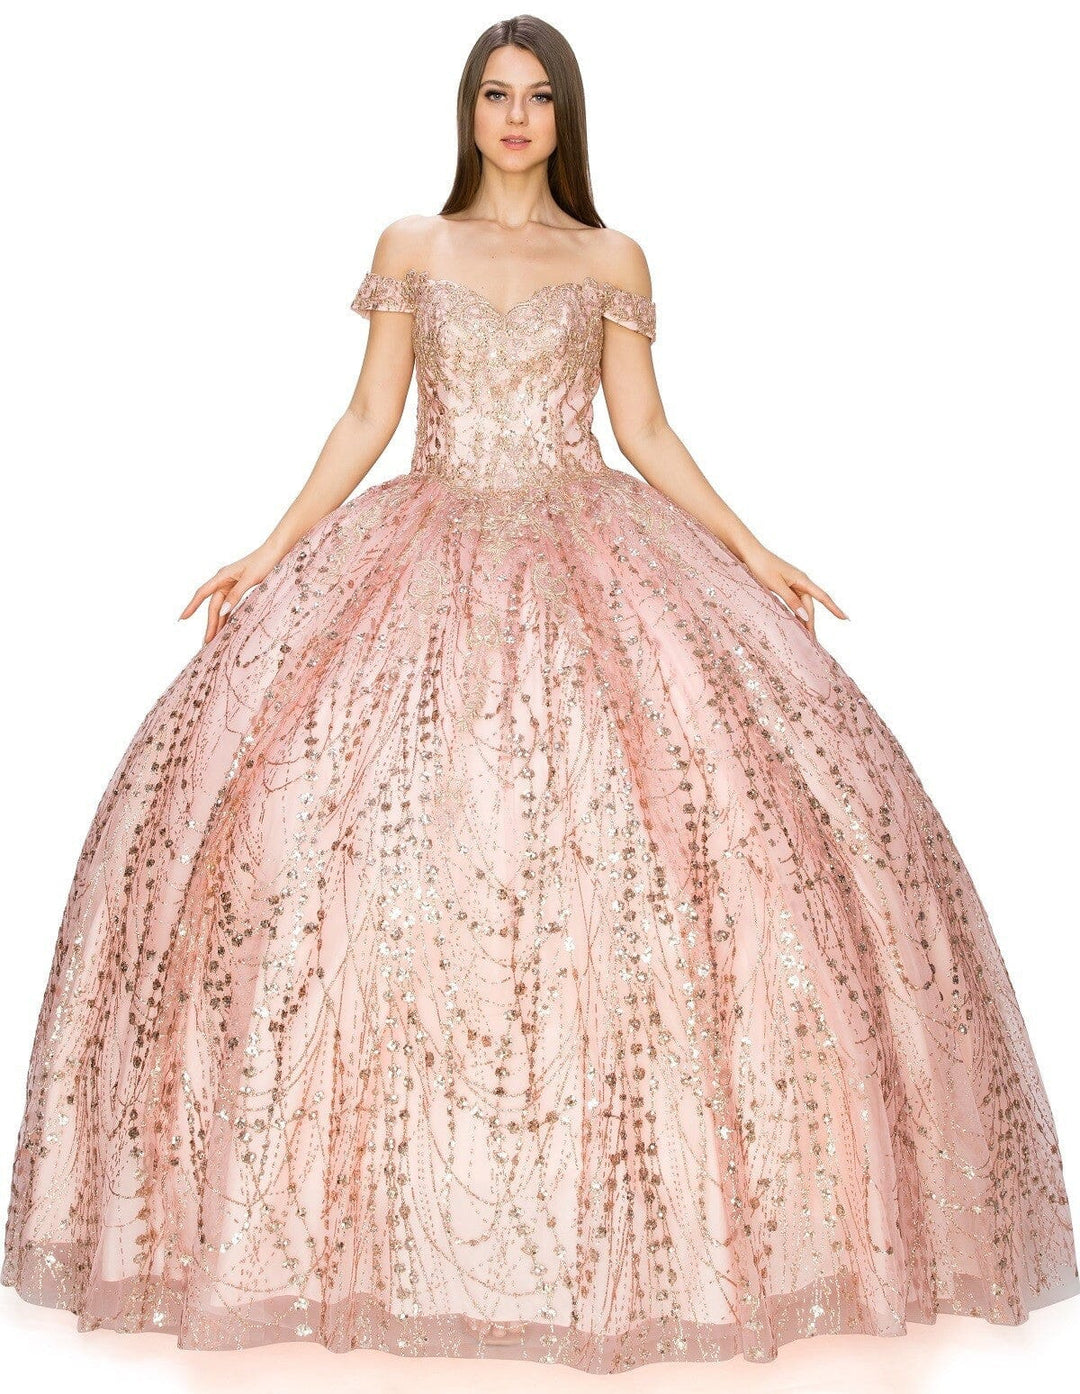 Glitter Off Shoulder Ball Gown by Cinderella Couture 8033J - Outlet